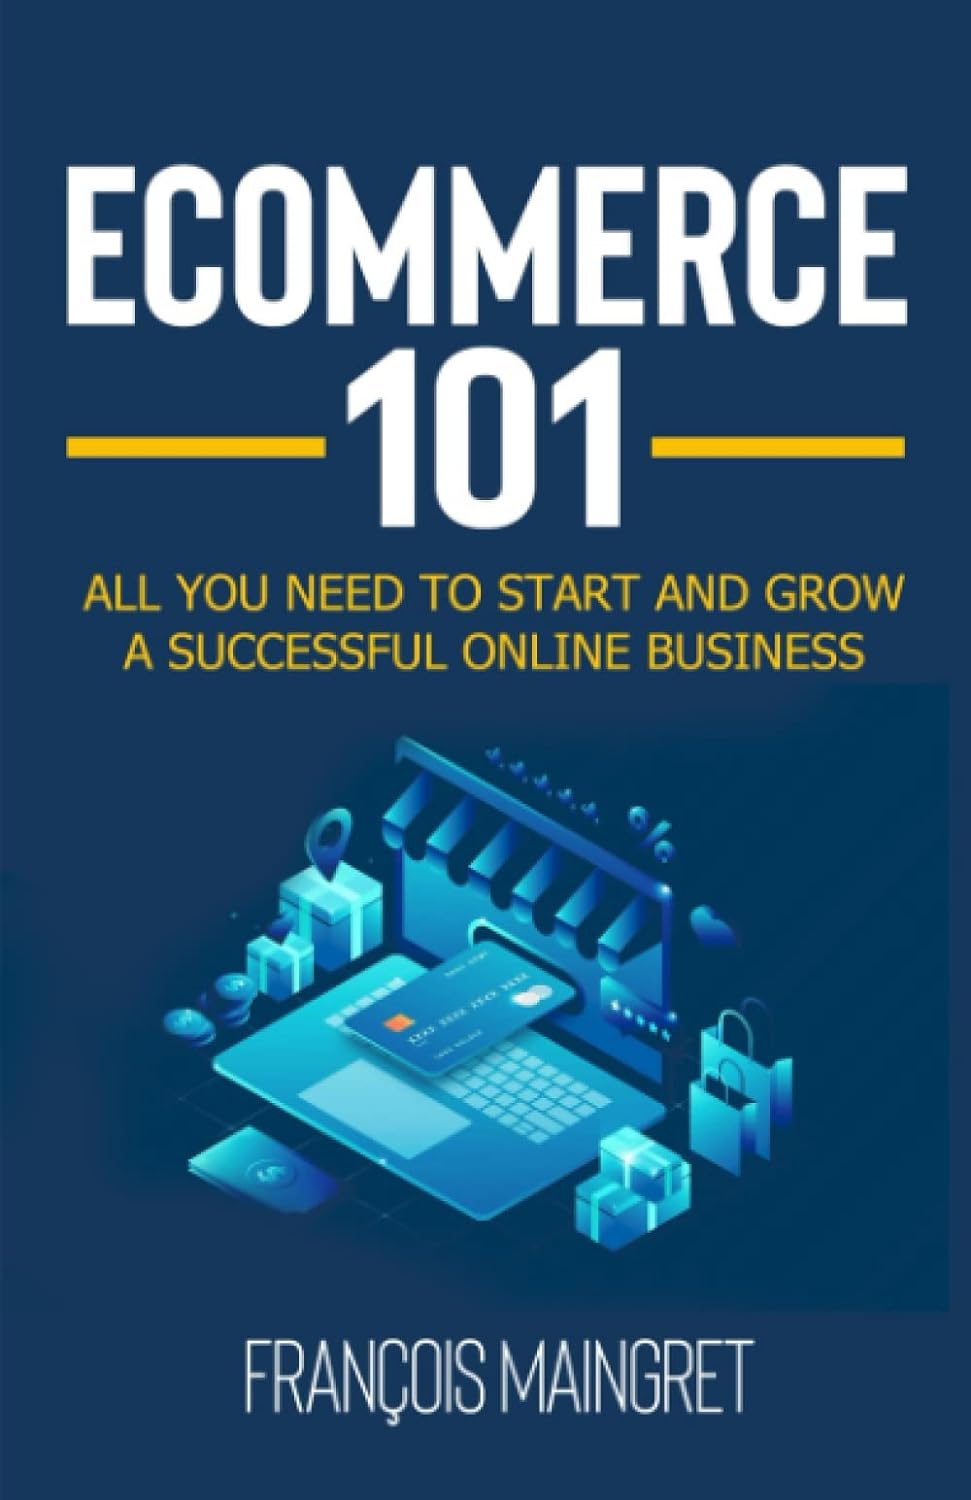 Ecommerce 101: All you need to start and grow a successful online business     Paperback – October 19, 2021